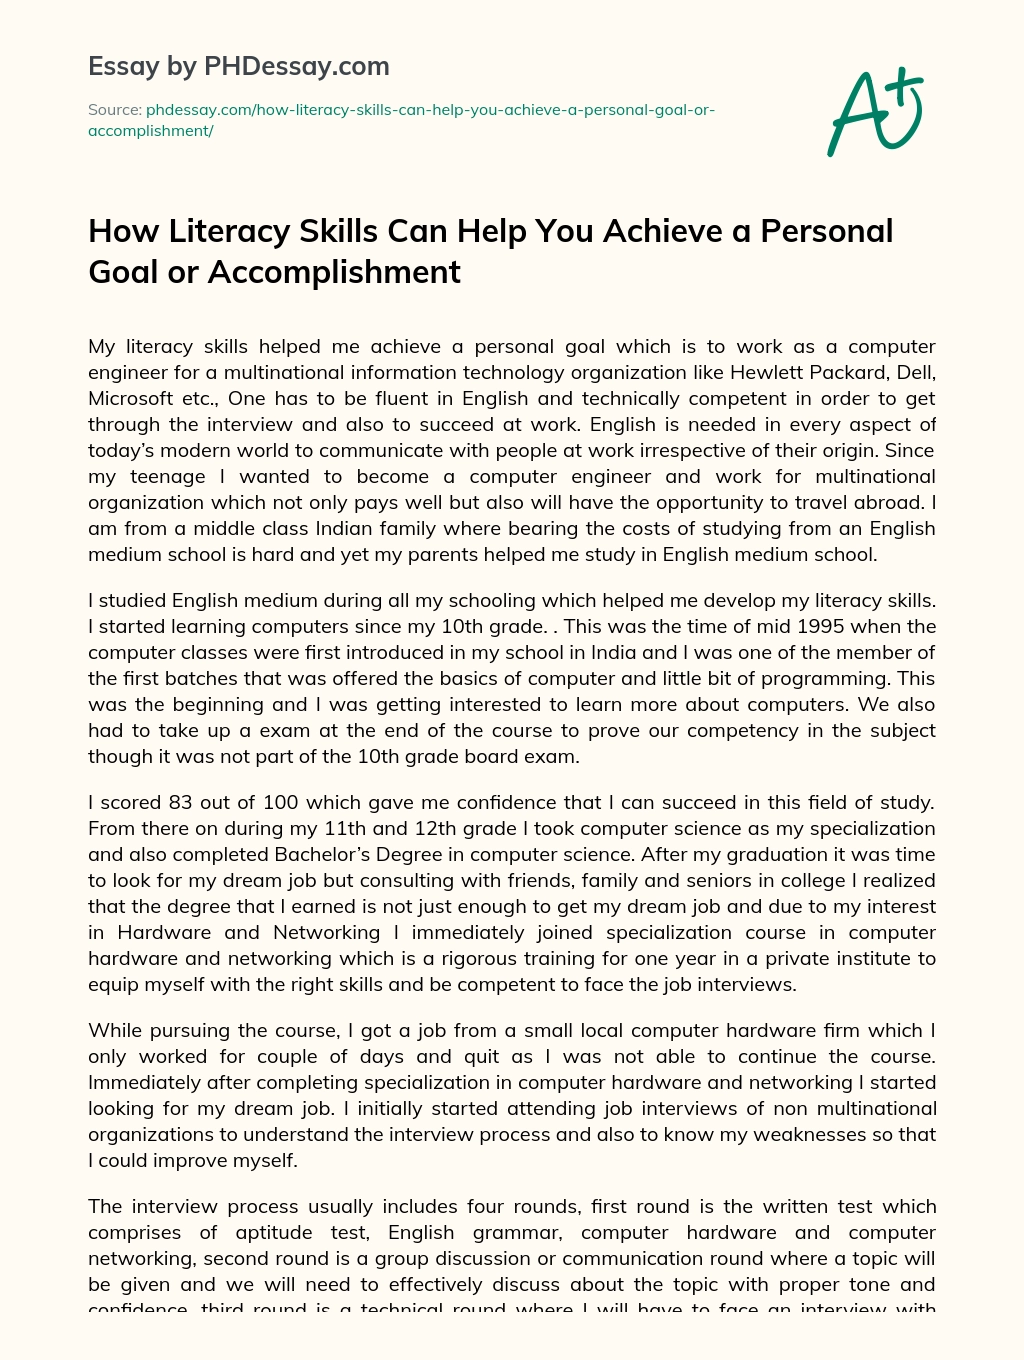 How Literacy Skills Can Help You Achieve a Personal Goal or Accomplishment essay